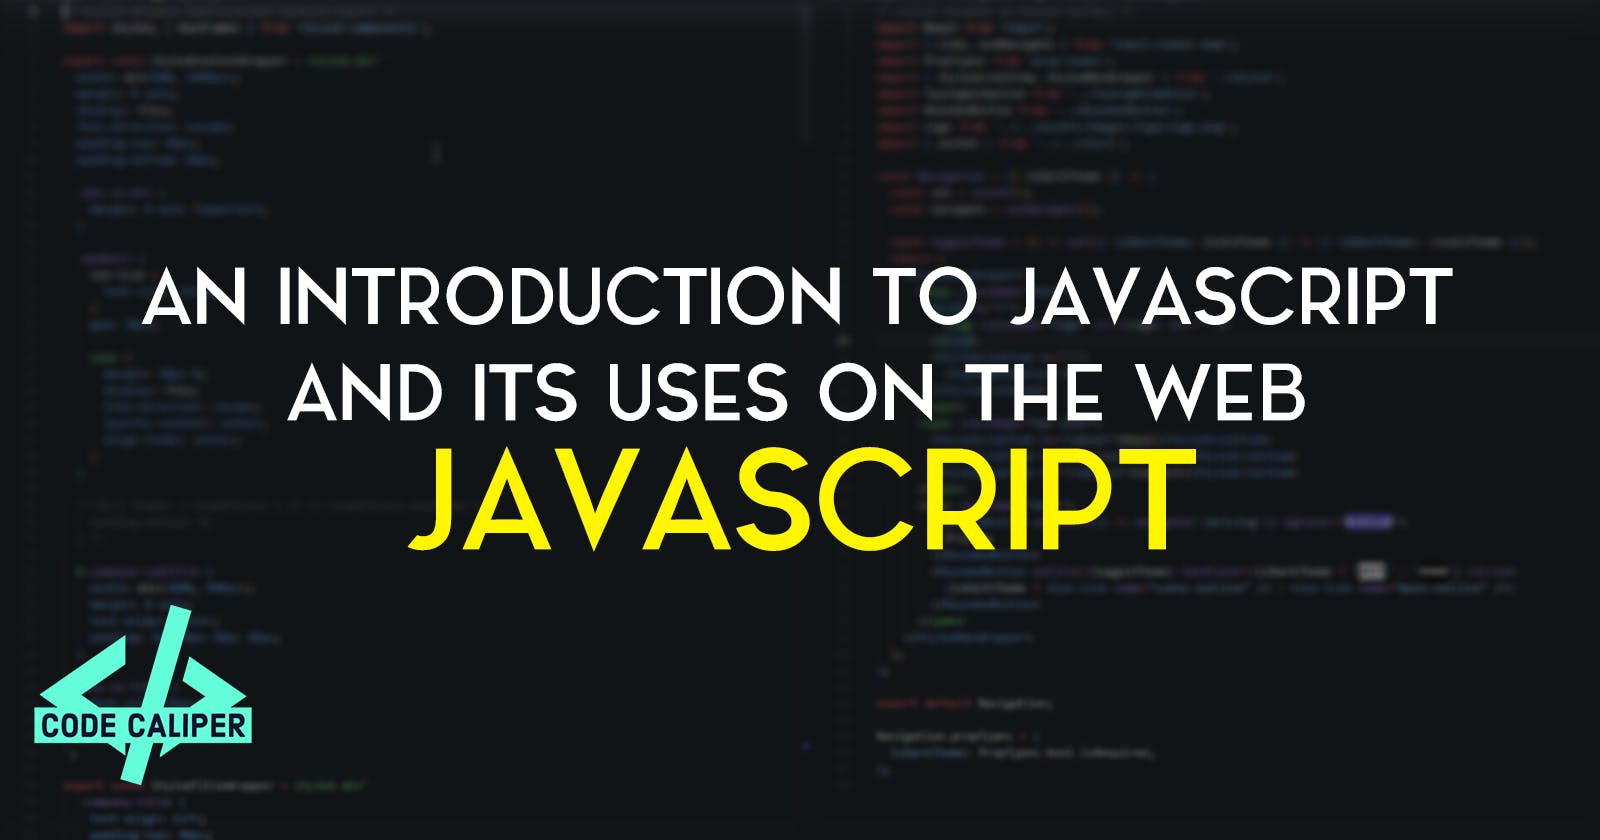 An introduction to JavaScript and its uses on the web